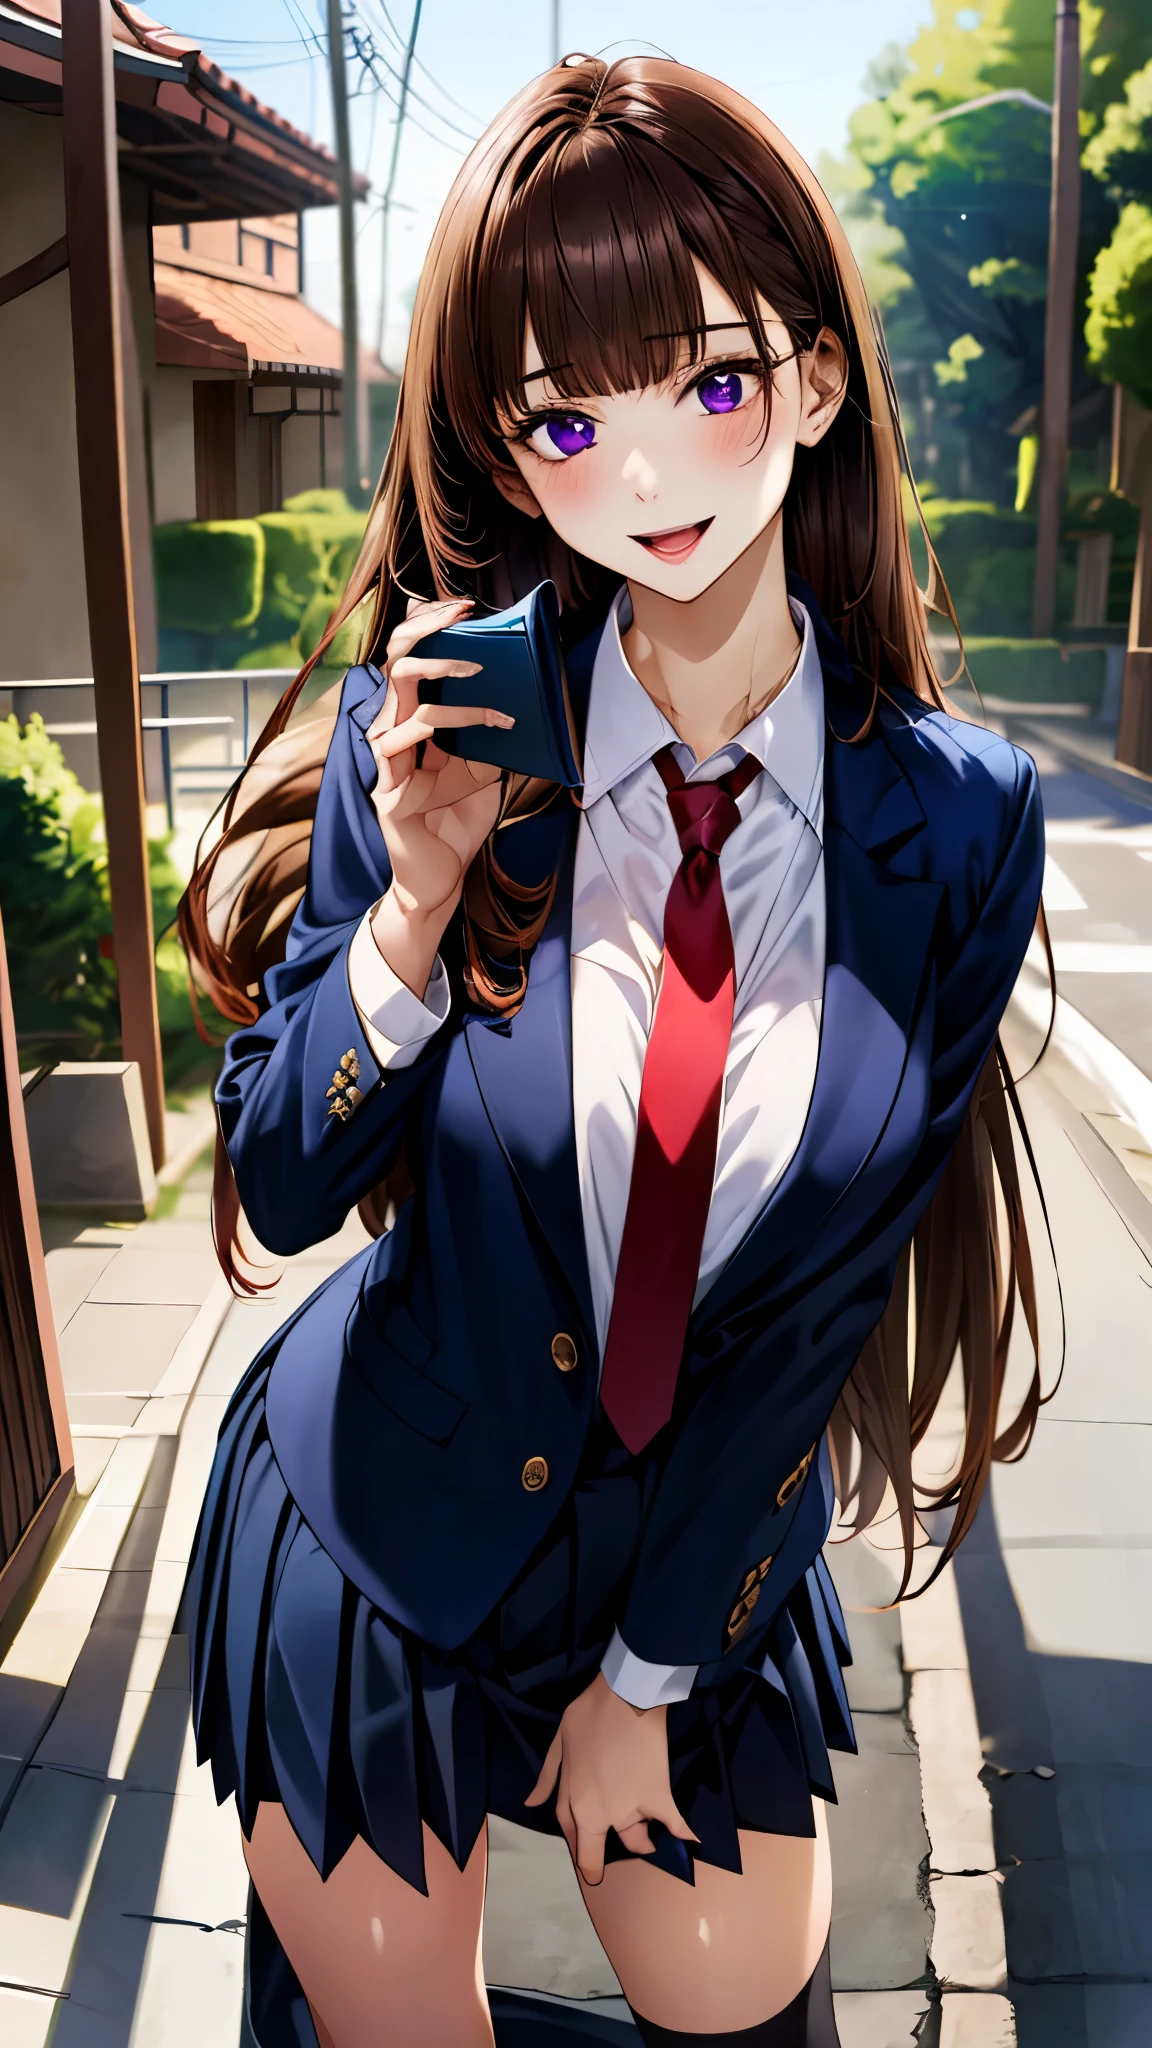 (masterpiece:1.3, top-quality, ultra high res, ultra detailed), (realistic, photorealistic:1.4), beautiful illustration, perfect lighting, natural lighting, colorful, depth of fields, 
beautiful detailed hair, beautiful detailed face, beautiful detailed eyes, beautiful clavicle, beautiful body, beautiful chest, beautiful thigh, beautiful legs, beautiful fingers, 
looking at viewer, 1 girl, japanese, high school girl, perfect face, (perfect anatomy, anatomically correct), cute and symmetrical face, babyface, , shiny skin, 
(long hair:1.5, straight hair:1.4, purple brown hair), blunt bangs, purple eyes, long eye lasher, (medium breasts), slender, 
(((navy) blazer, collared white shirt, navy pleated skirt, dark red tie)), navy school socks, , 
(beautiful scenery), evening, (school gate), standing, call on phone, (seductive smile, open mouth), 